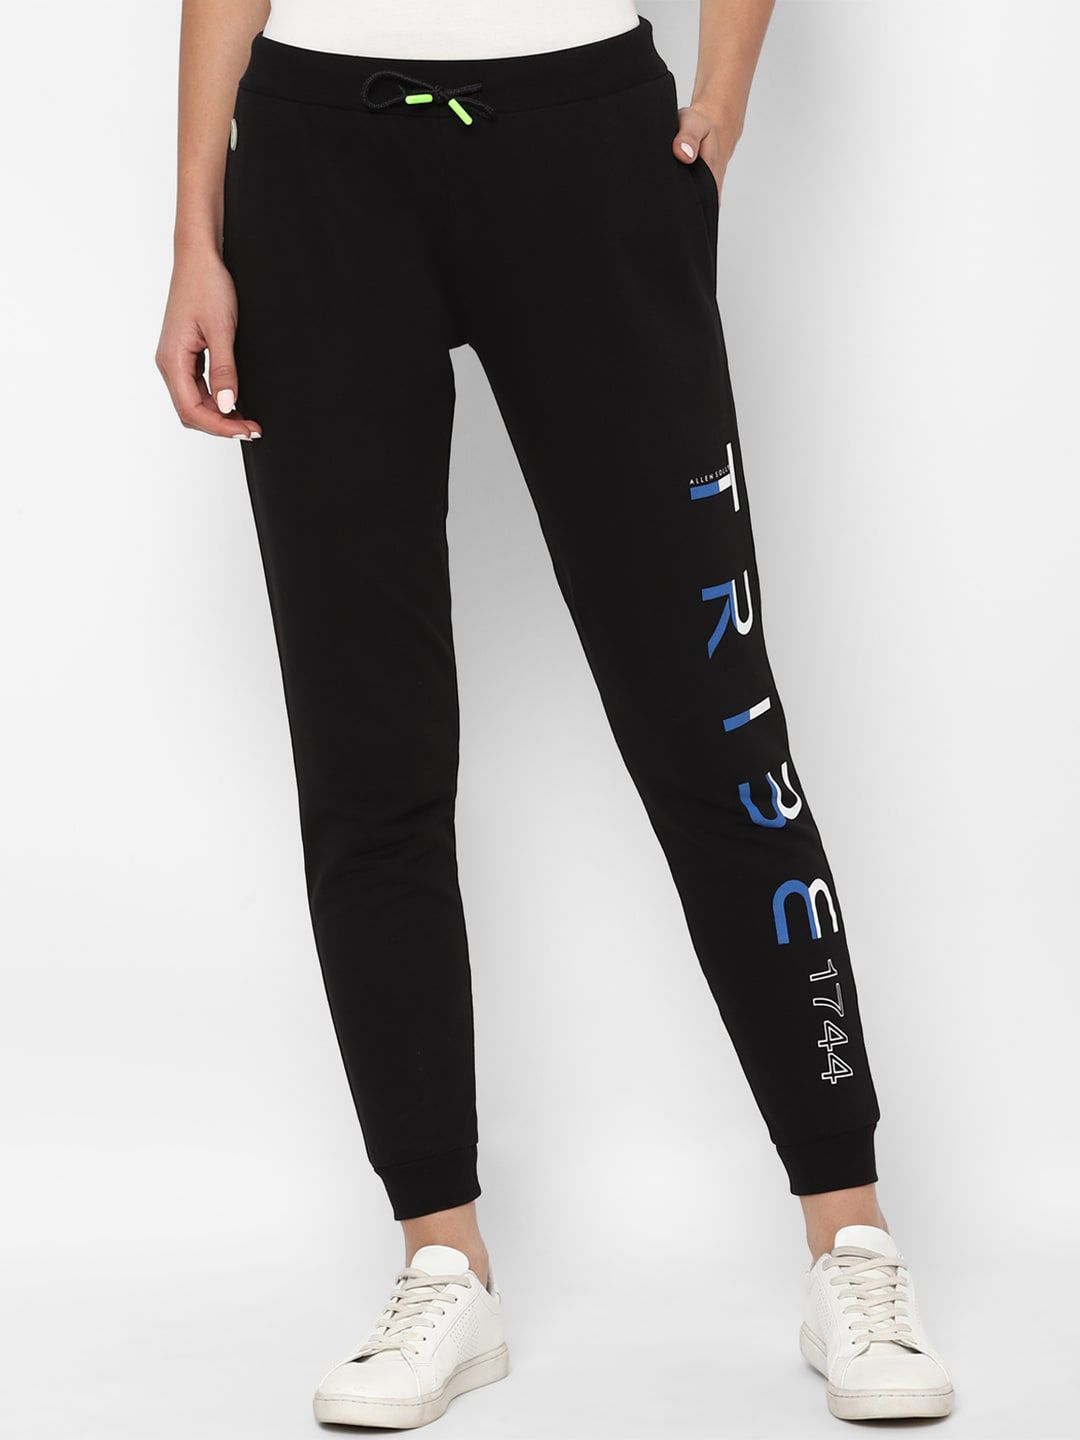 Allen Solly Woman Women Black Embroidered Pure Cotton Joggers Price in India